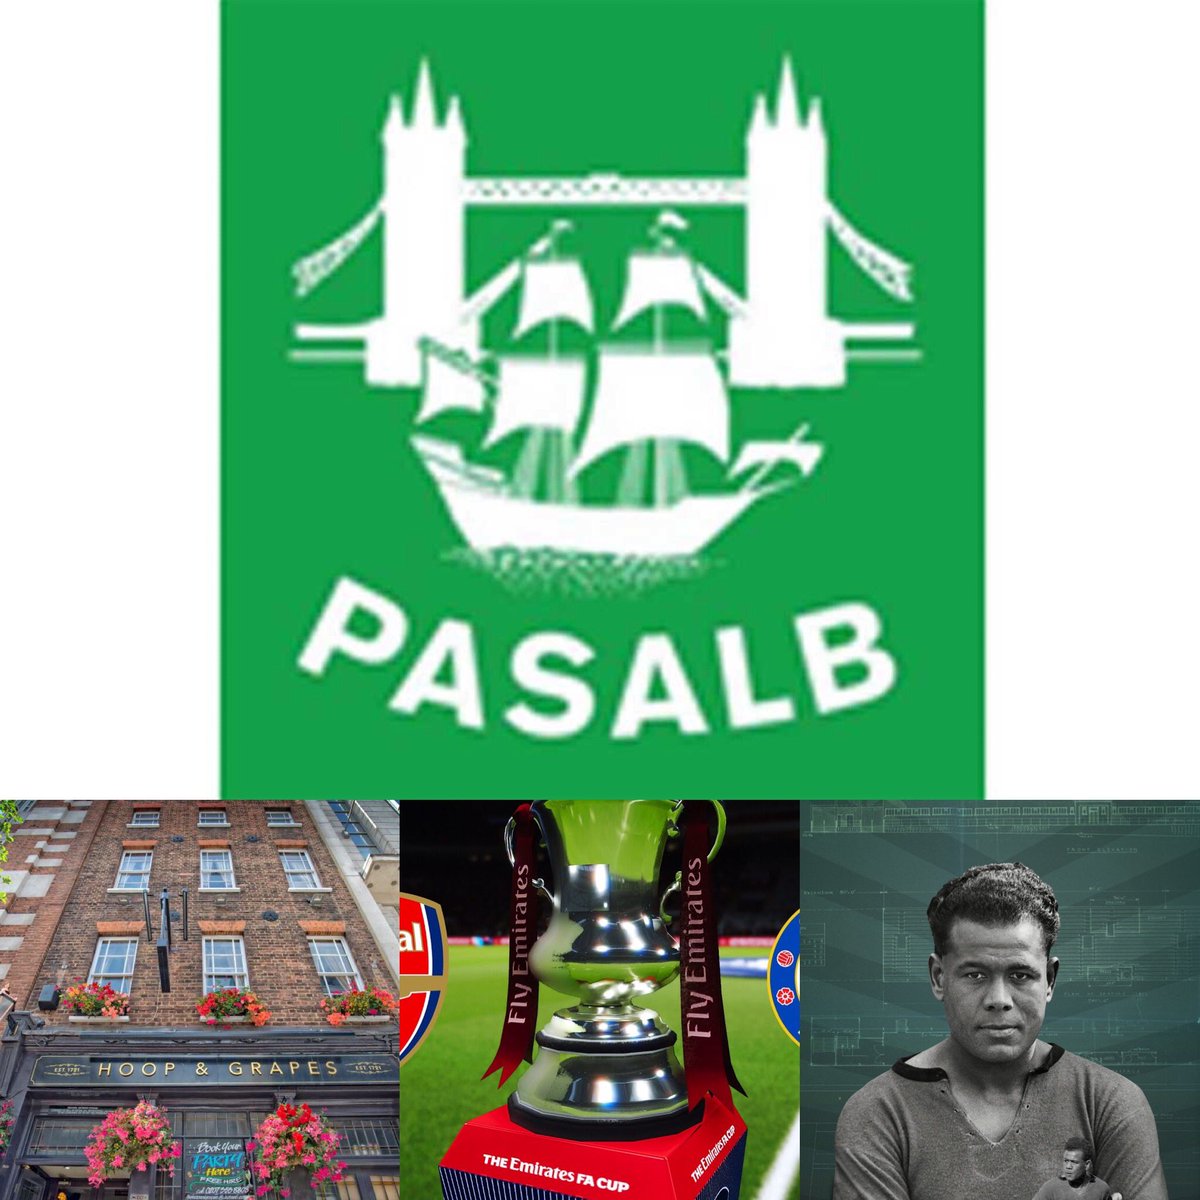 That London lot PASALB  @pasalb support the campaign!  http://www.pasalb.london/pasalb-supports-jack-leslie-campaign/